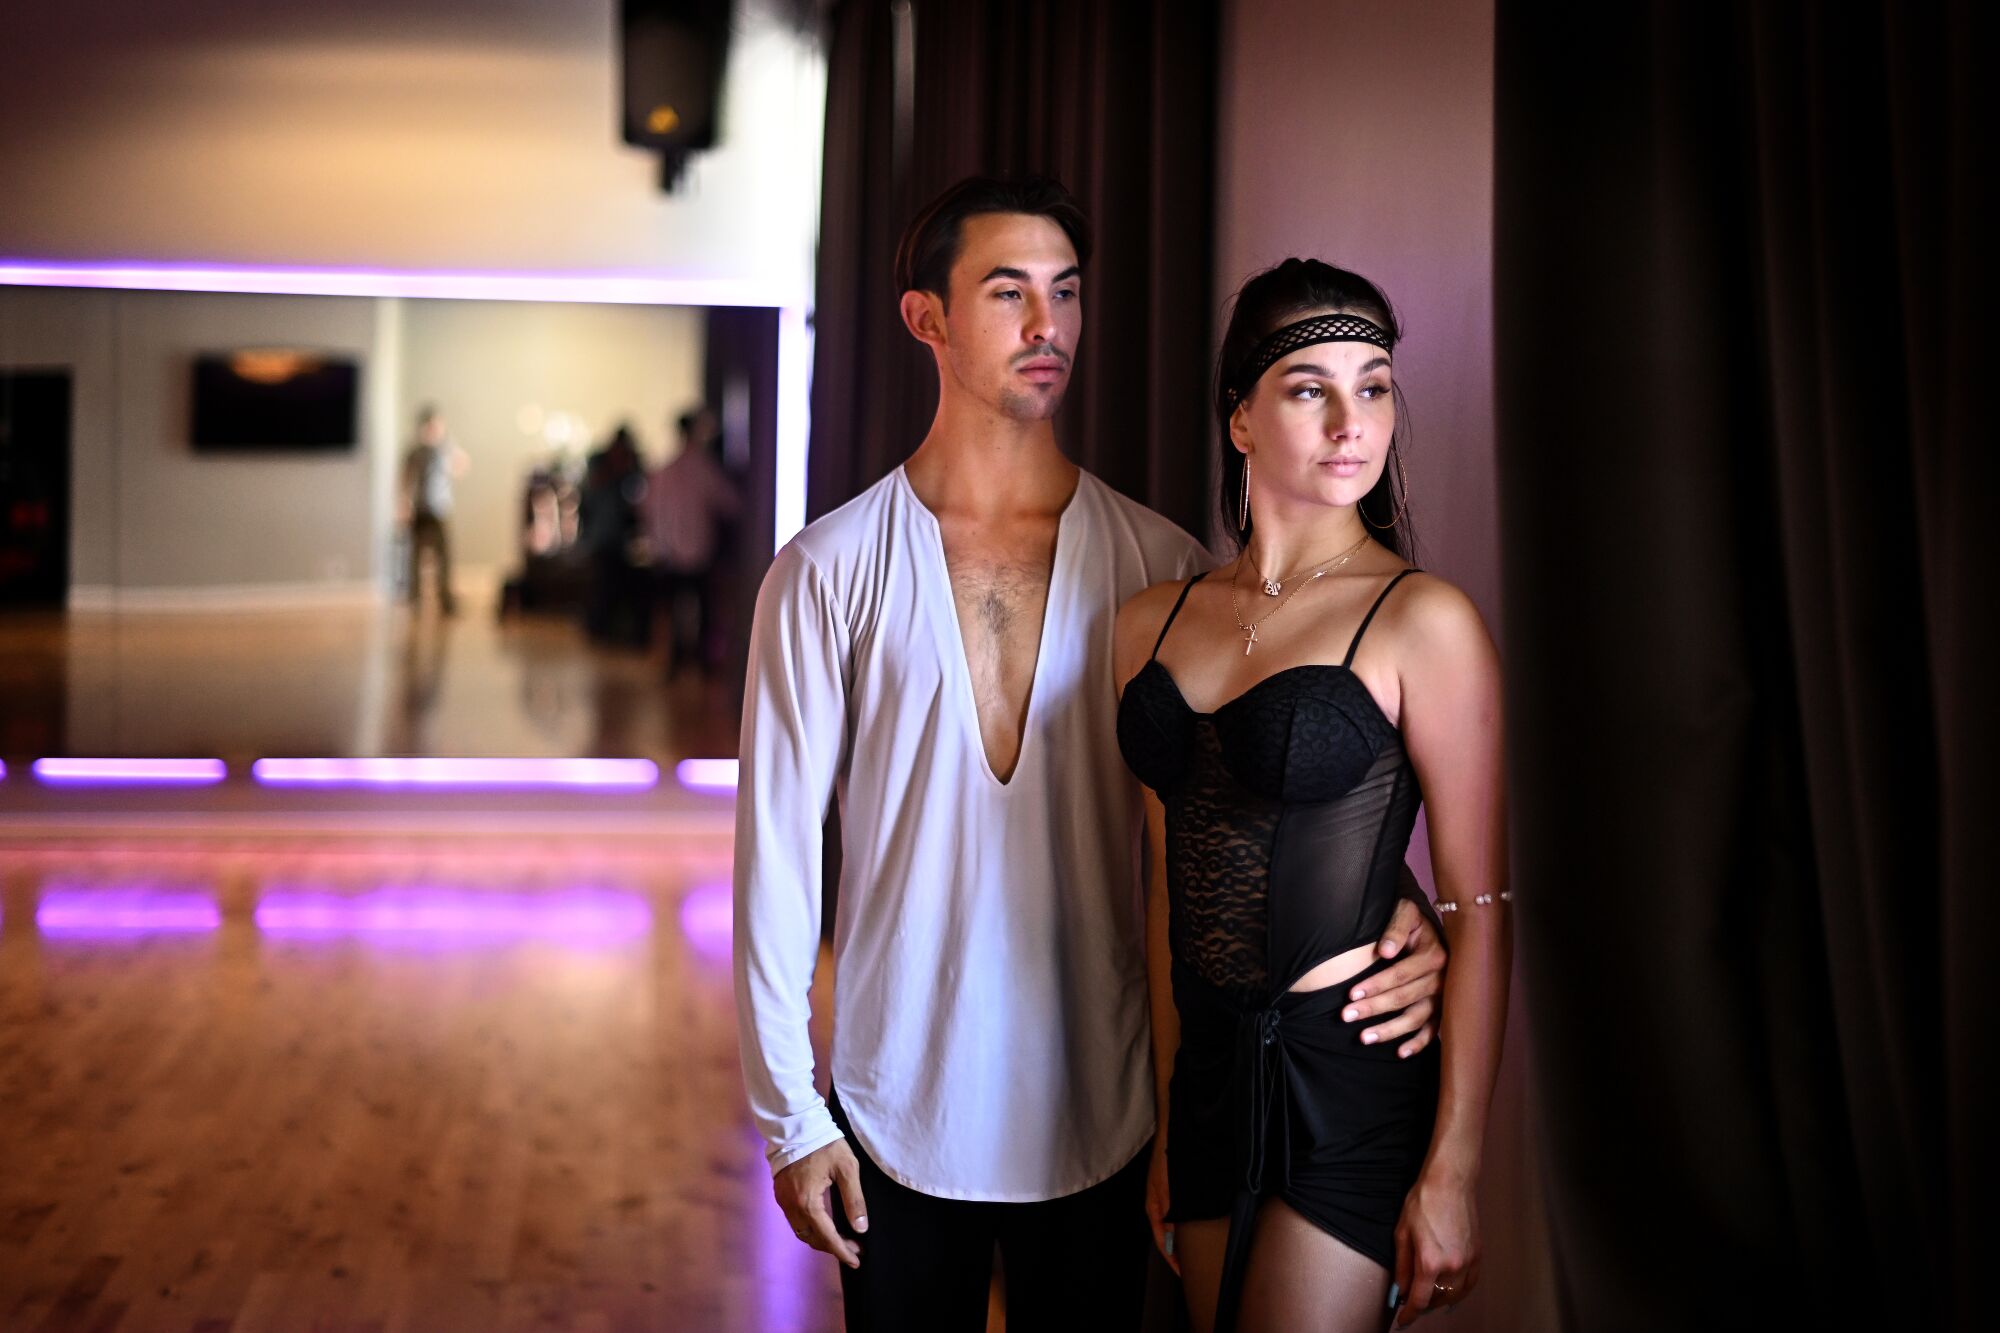 A man and woman in a dance studio.